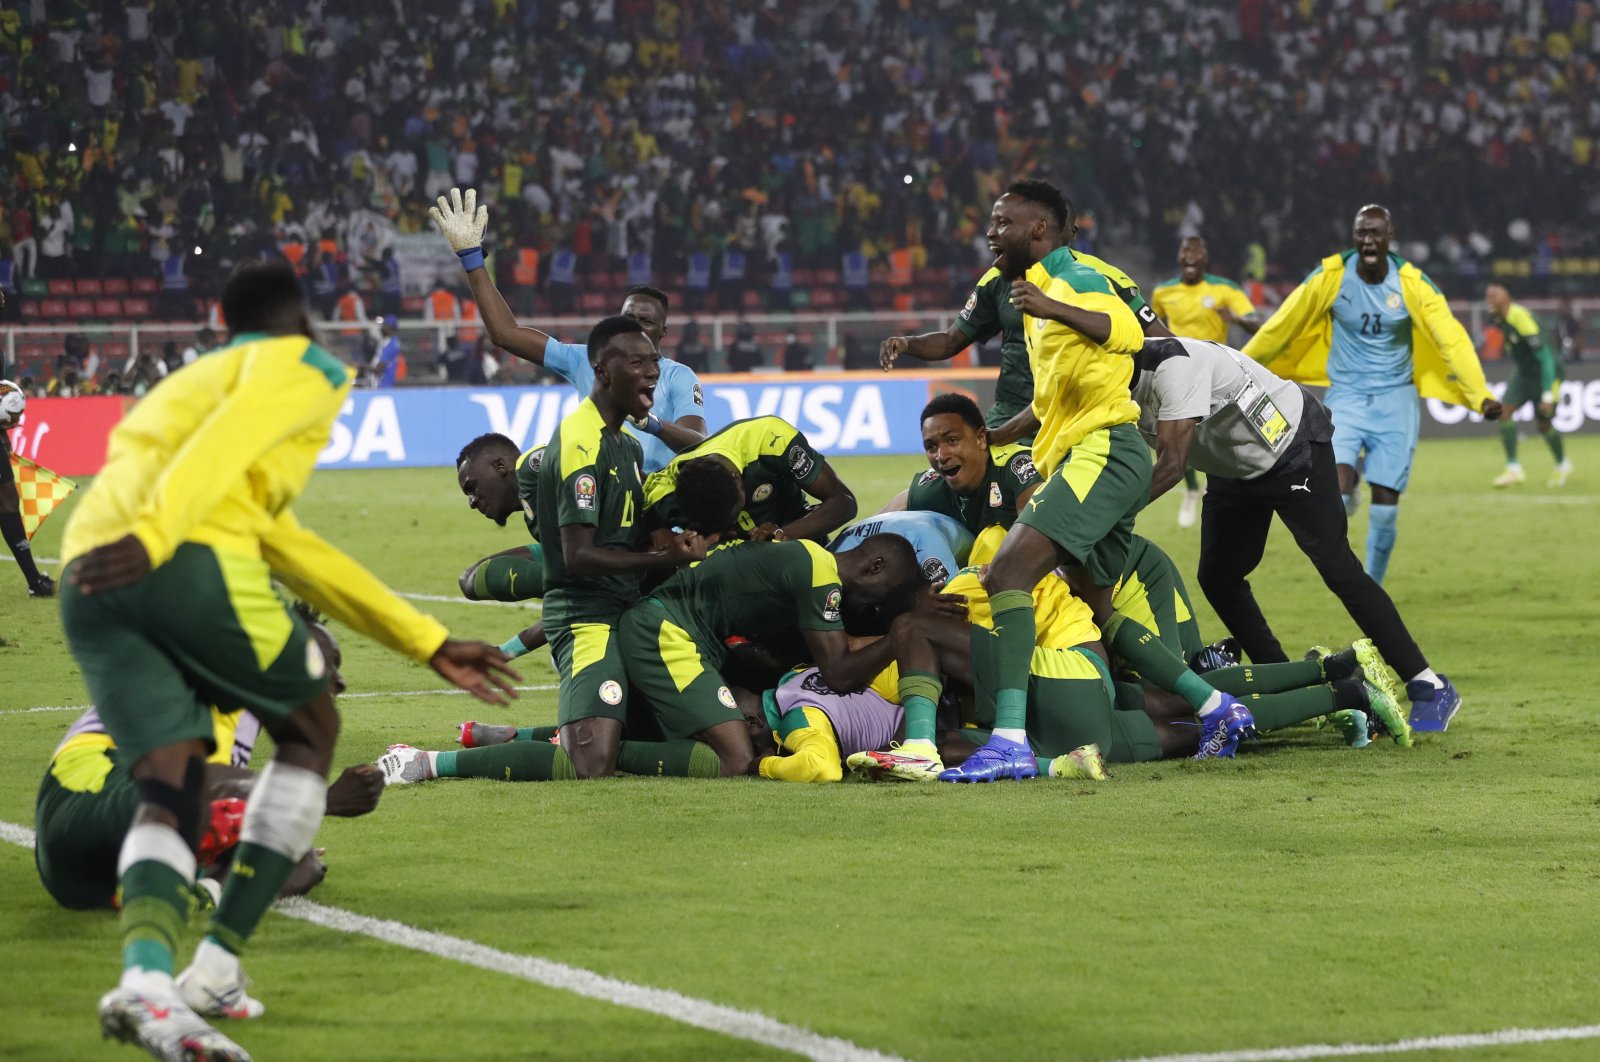 Senegal players celebrate winning the penalty shoot out against Egypt in the final of Africa Cup of Nations at Olembe Stadium, Yaounde, Cameroon, Feb. 6, 2022. (Reuters Photo)